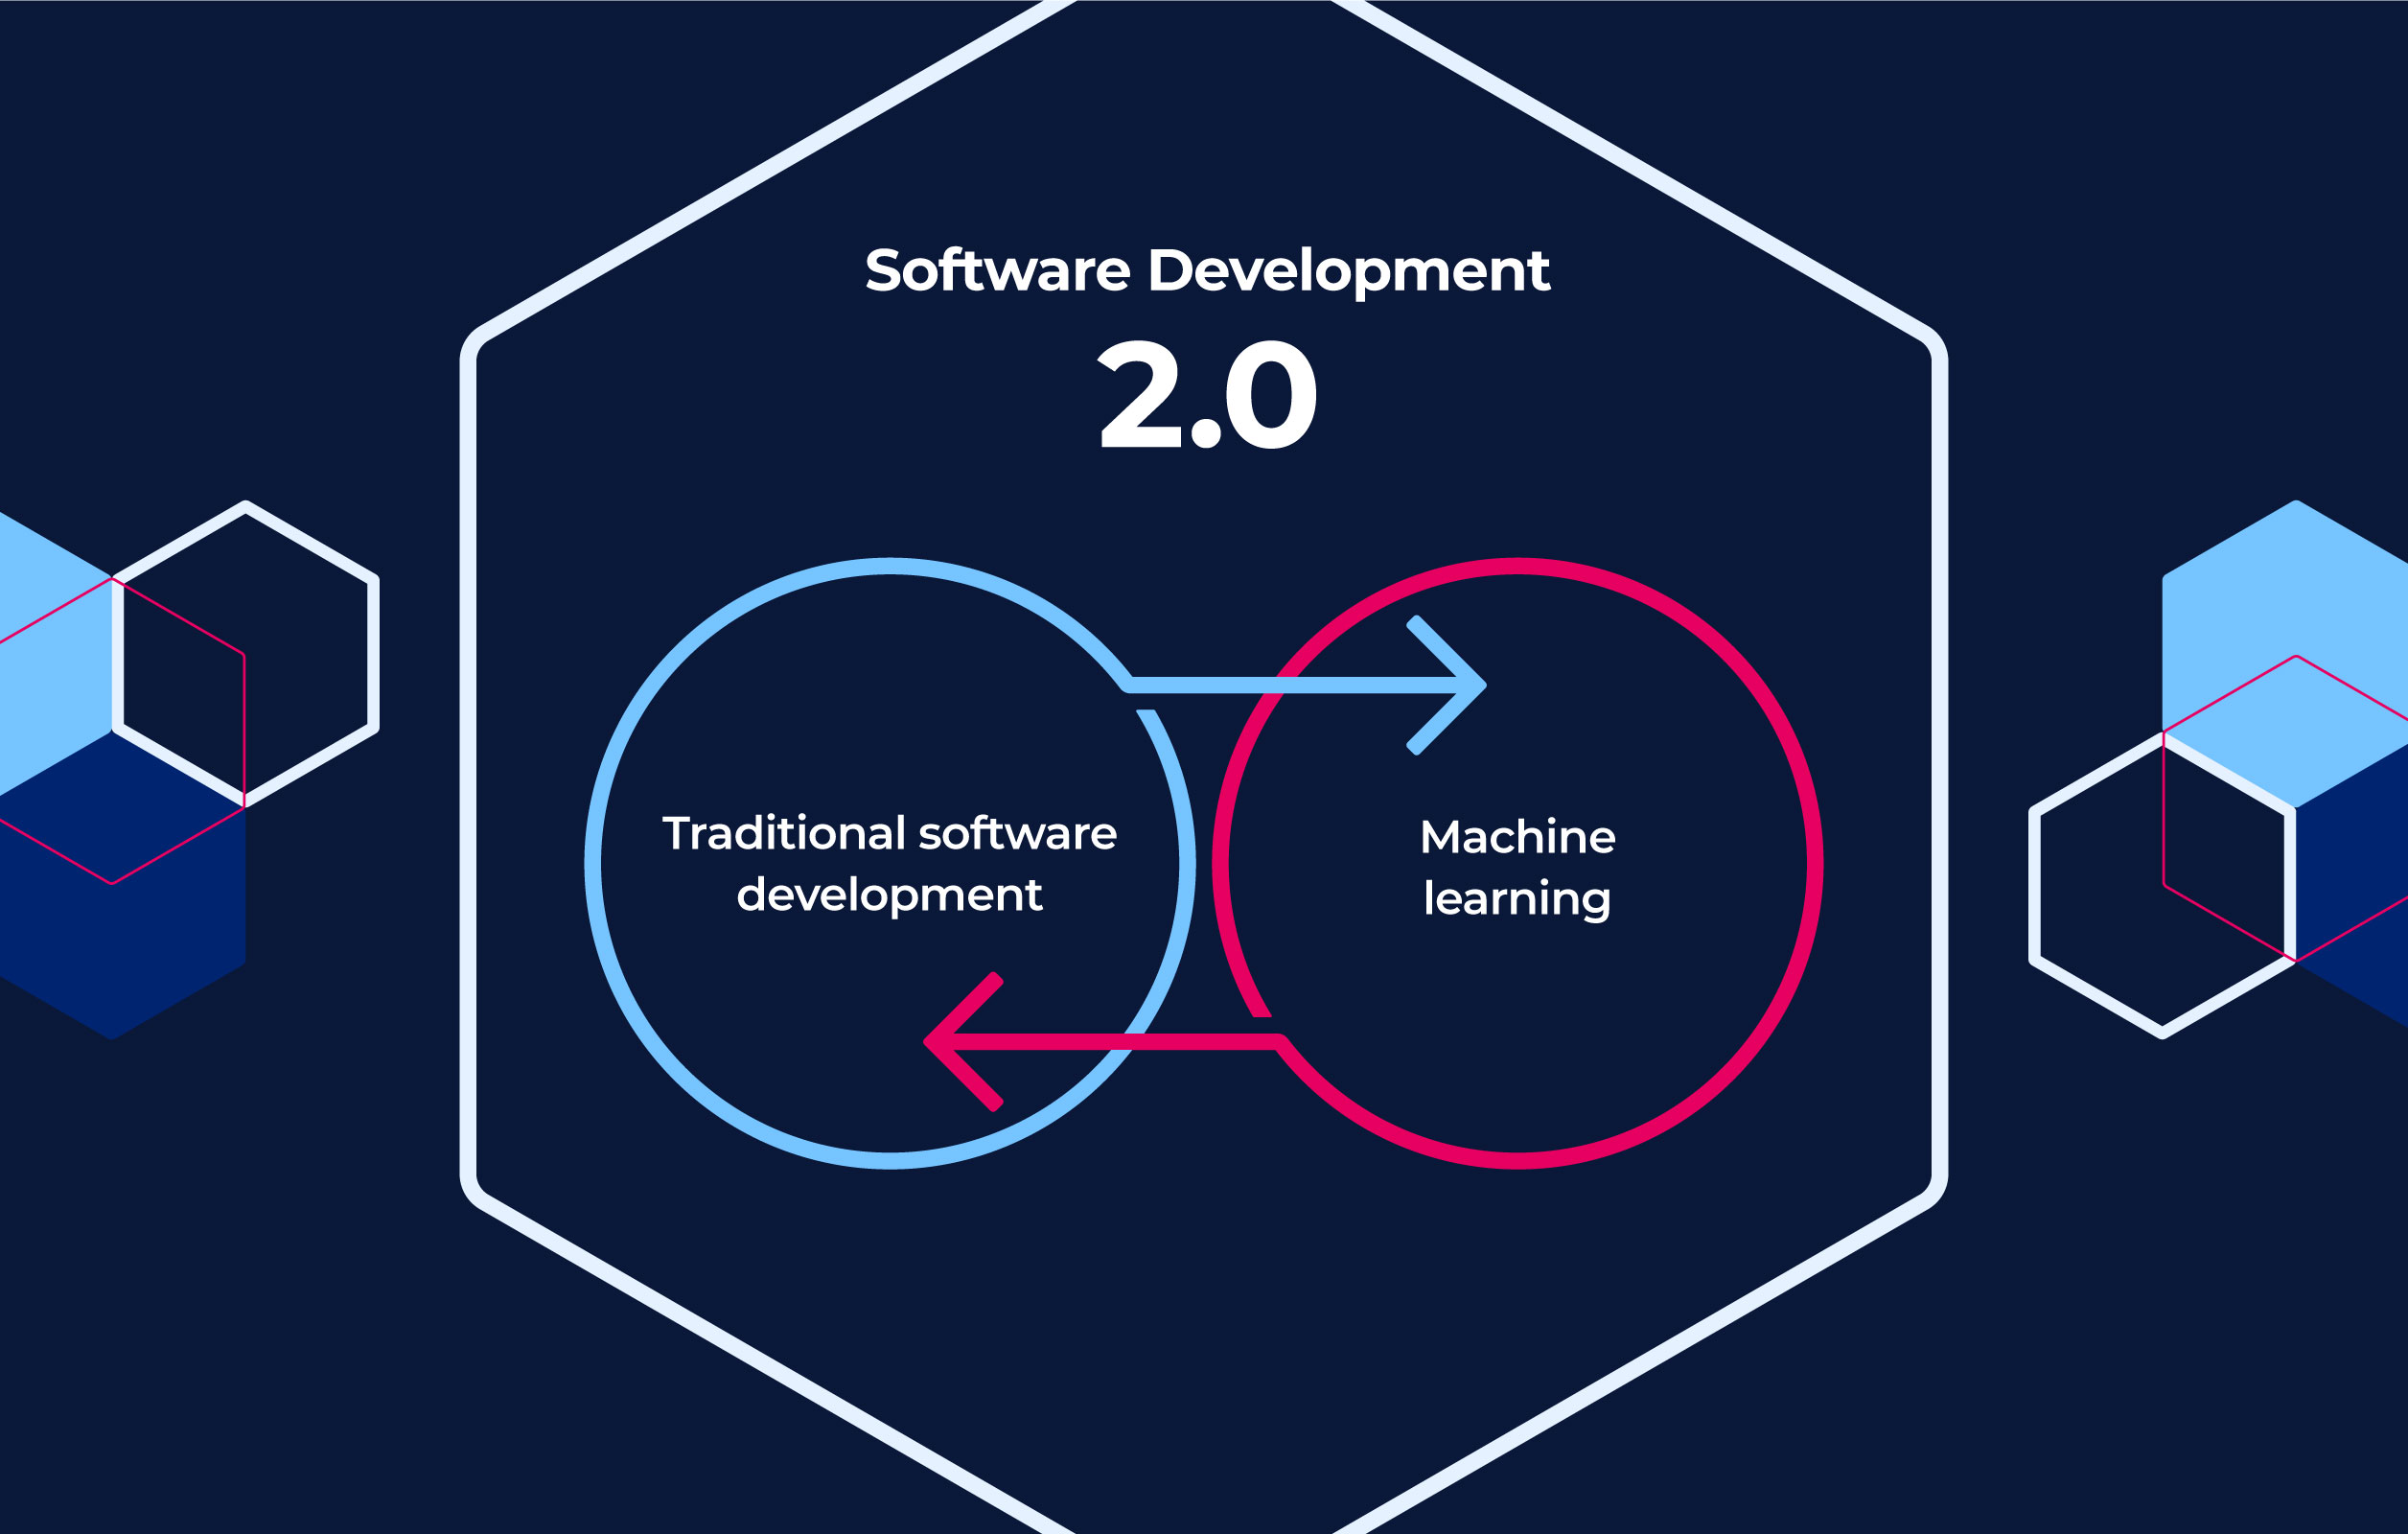 Figure 2. Software development 2.0 is the mutually beneficial intersection of traditional software development and machine learning